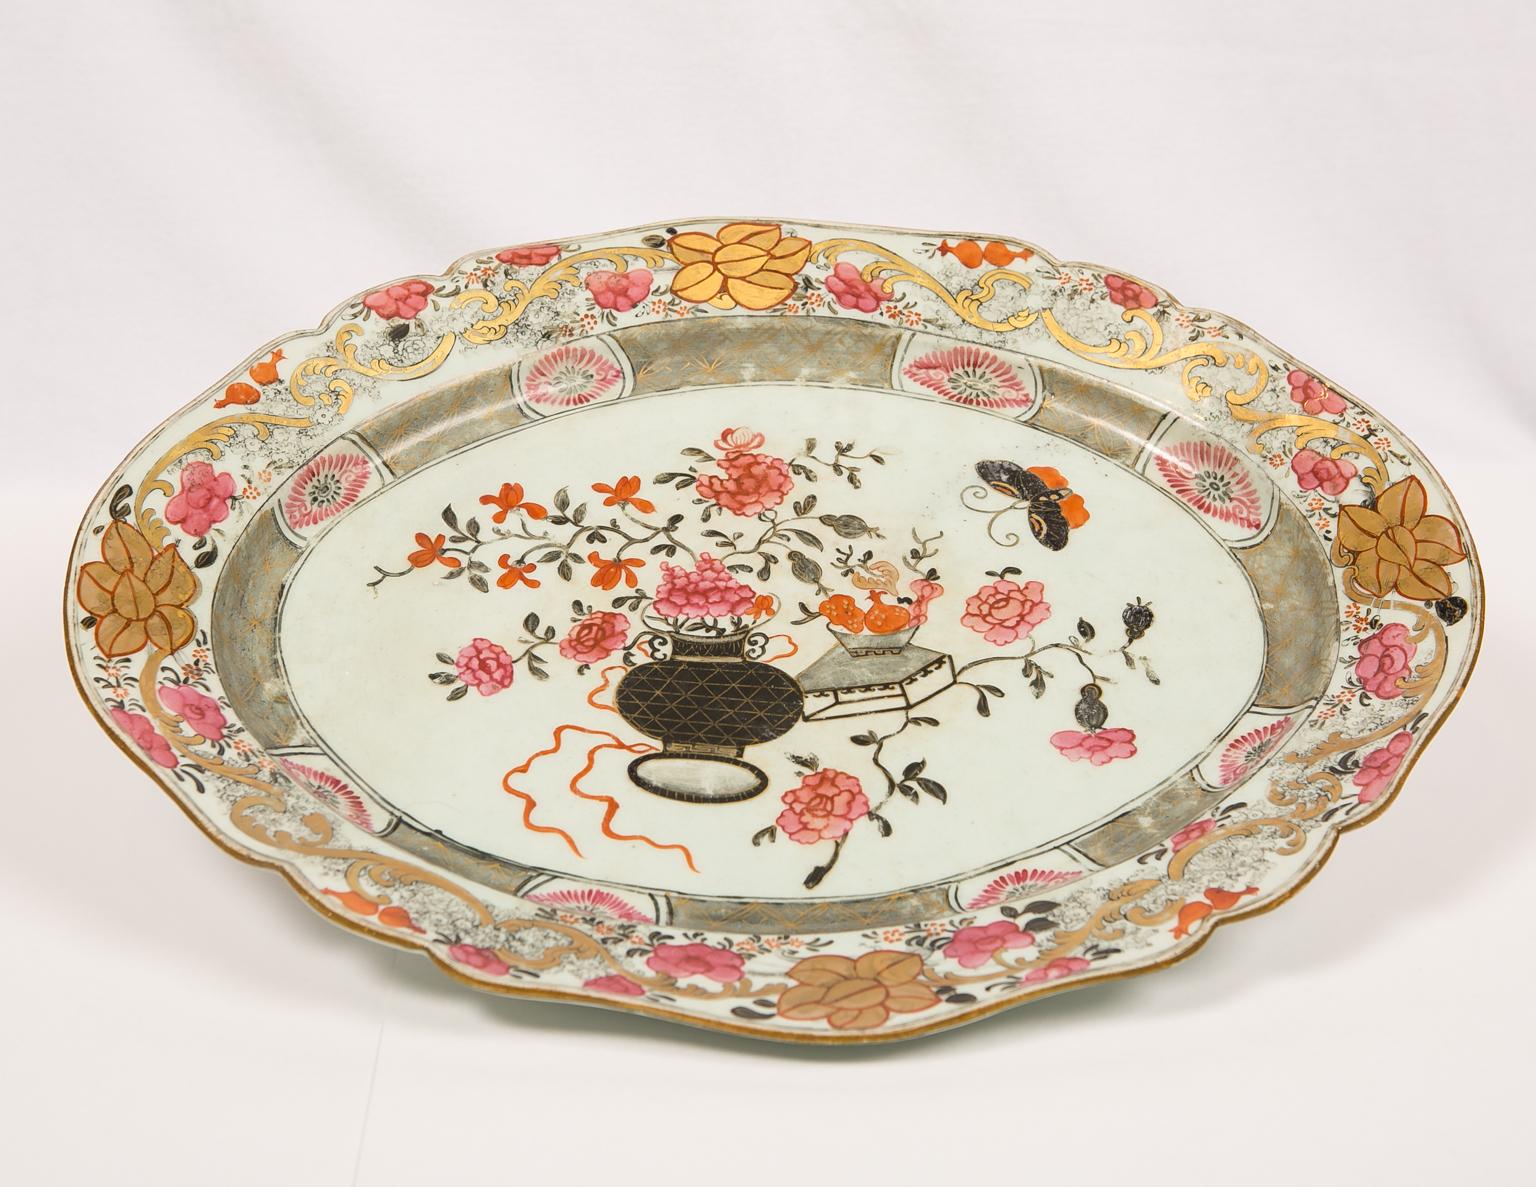 We are pleased to offer this large Chinese porcelain platter which is decorated with vibrant floral patterns in a beautiful palette of pink, gray, black and gold. Made in the first half of the 19th century, it is painted in the center showing a